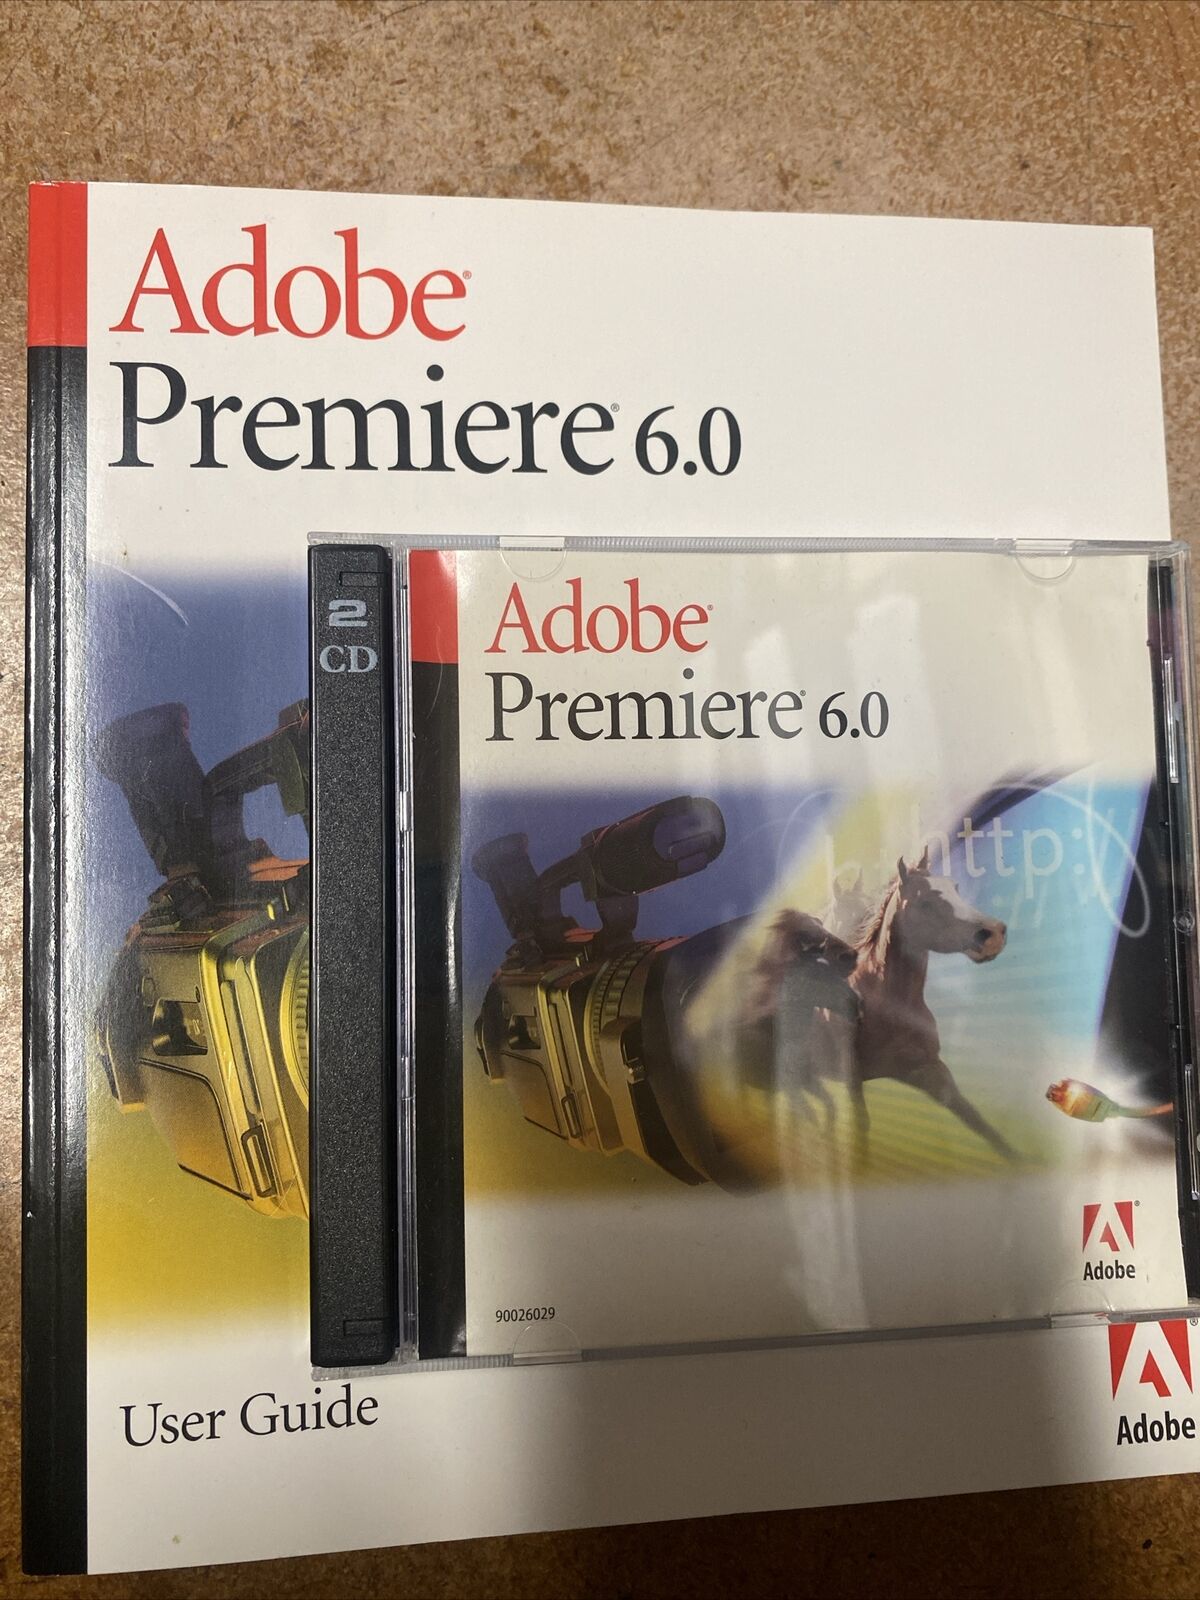 Adobe Premiere 6.0 Windows Full Retail with Serial Numbers